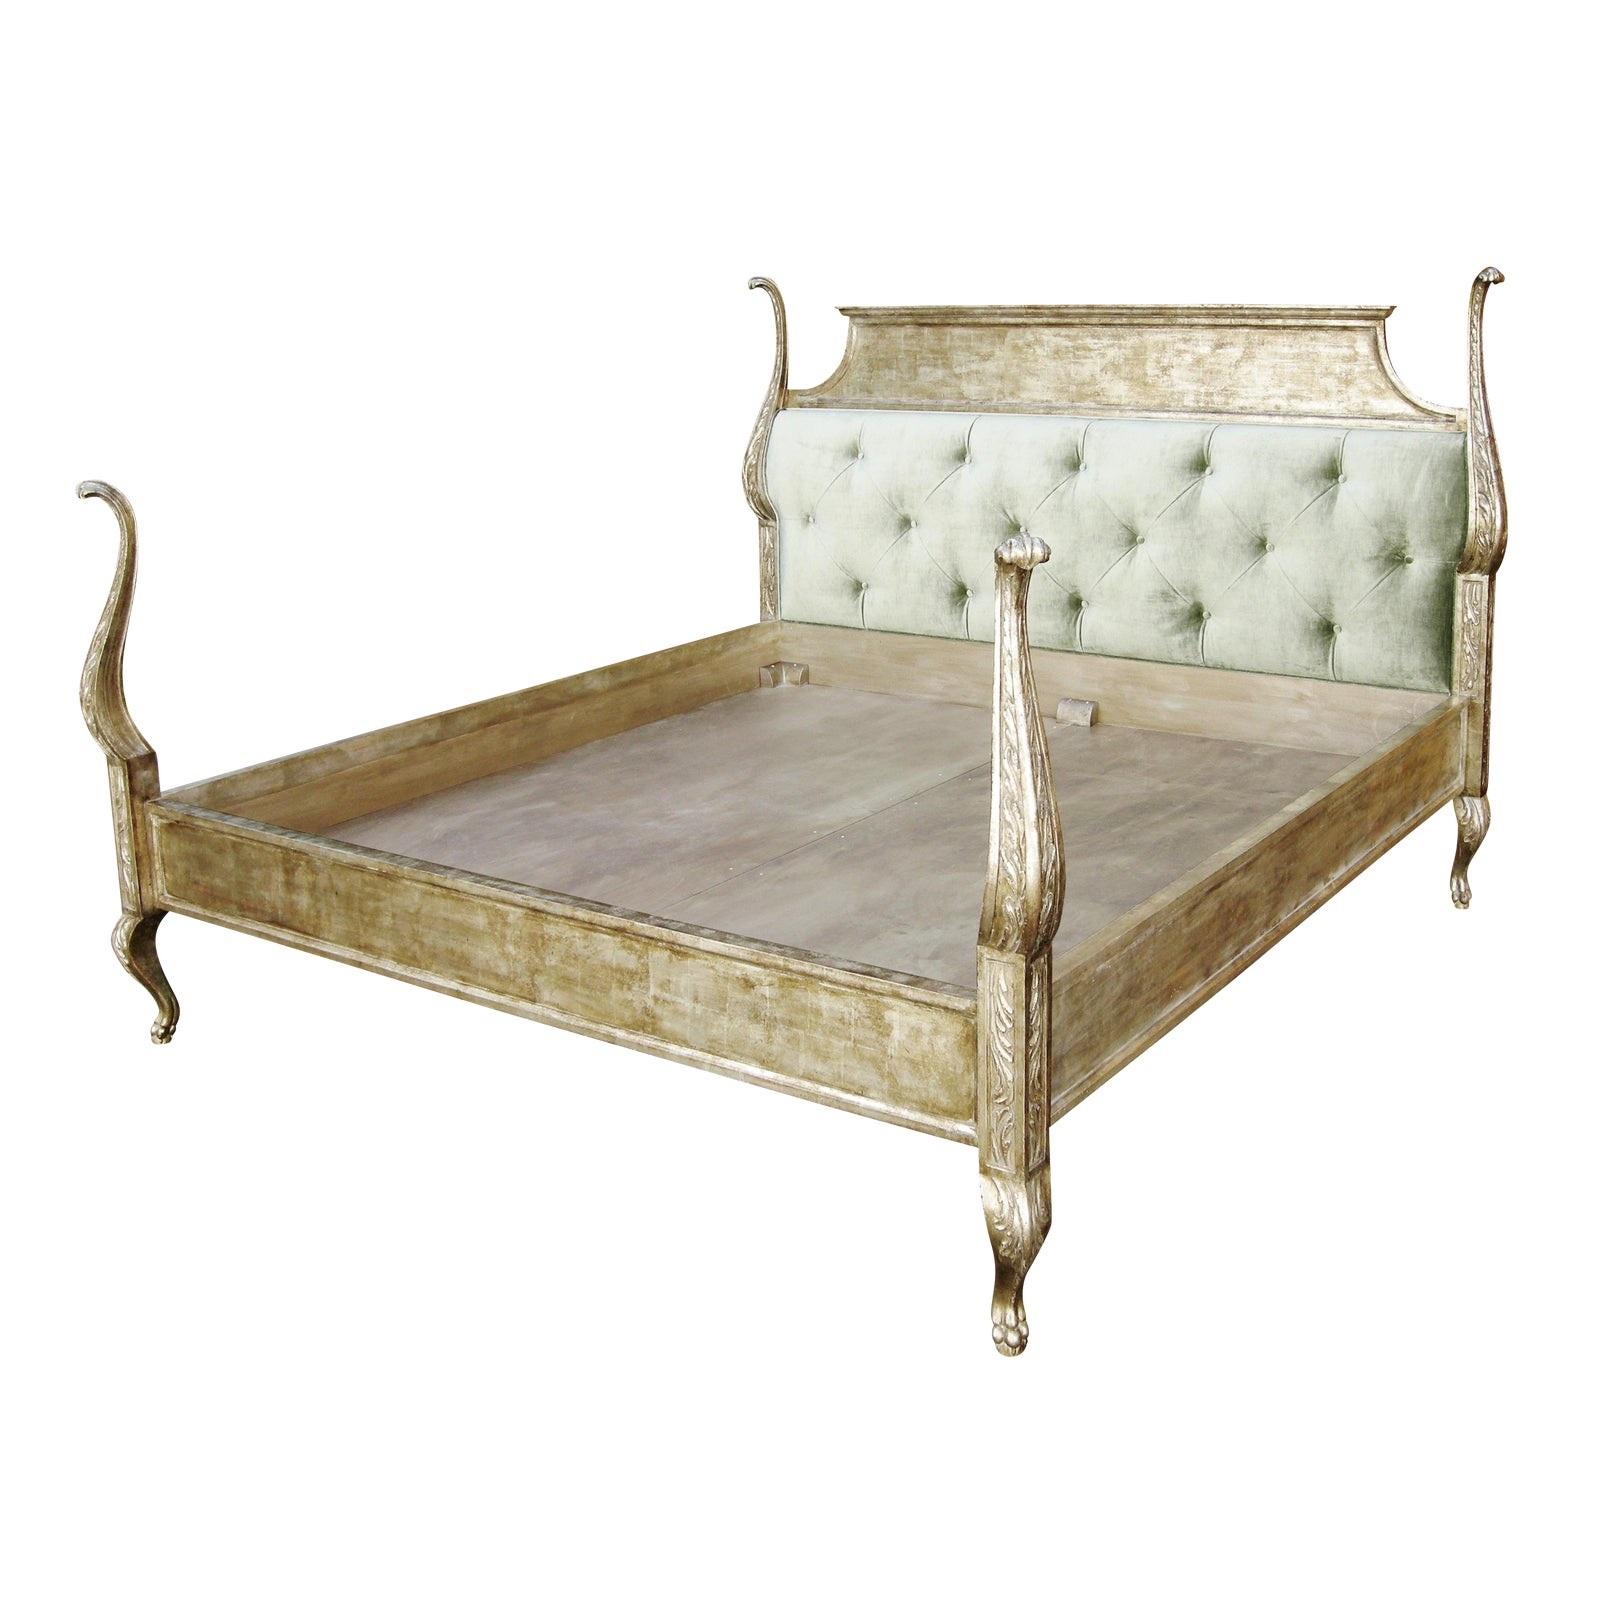 Carved Italian Venetian queen size bed by Randy Esada

Venetian bed, queen tall size
Finish: 23-karat distressed white gold
Fabric: 3-4 Yards Plain.